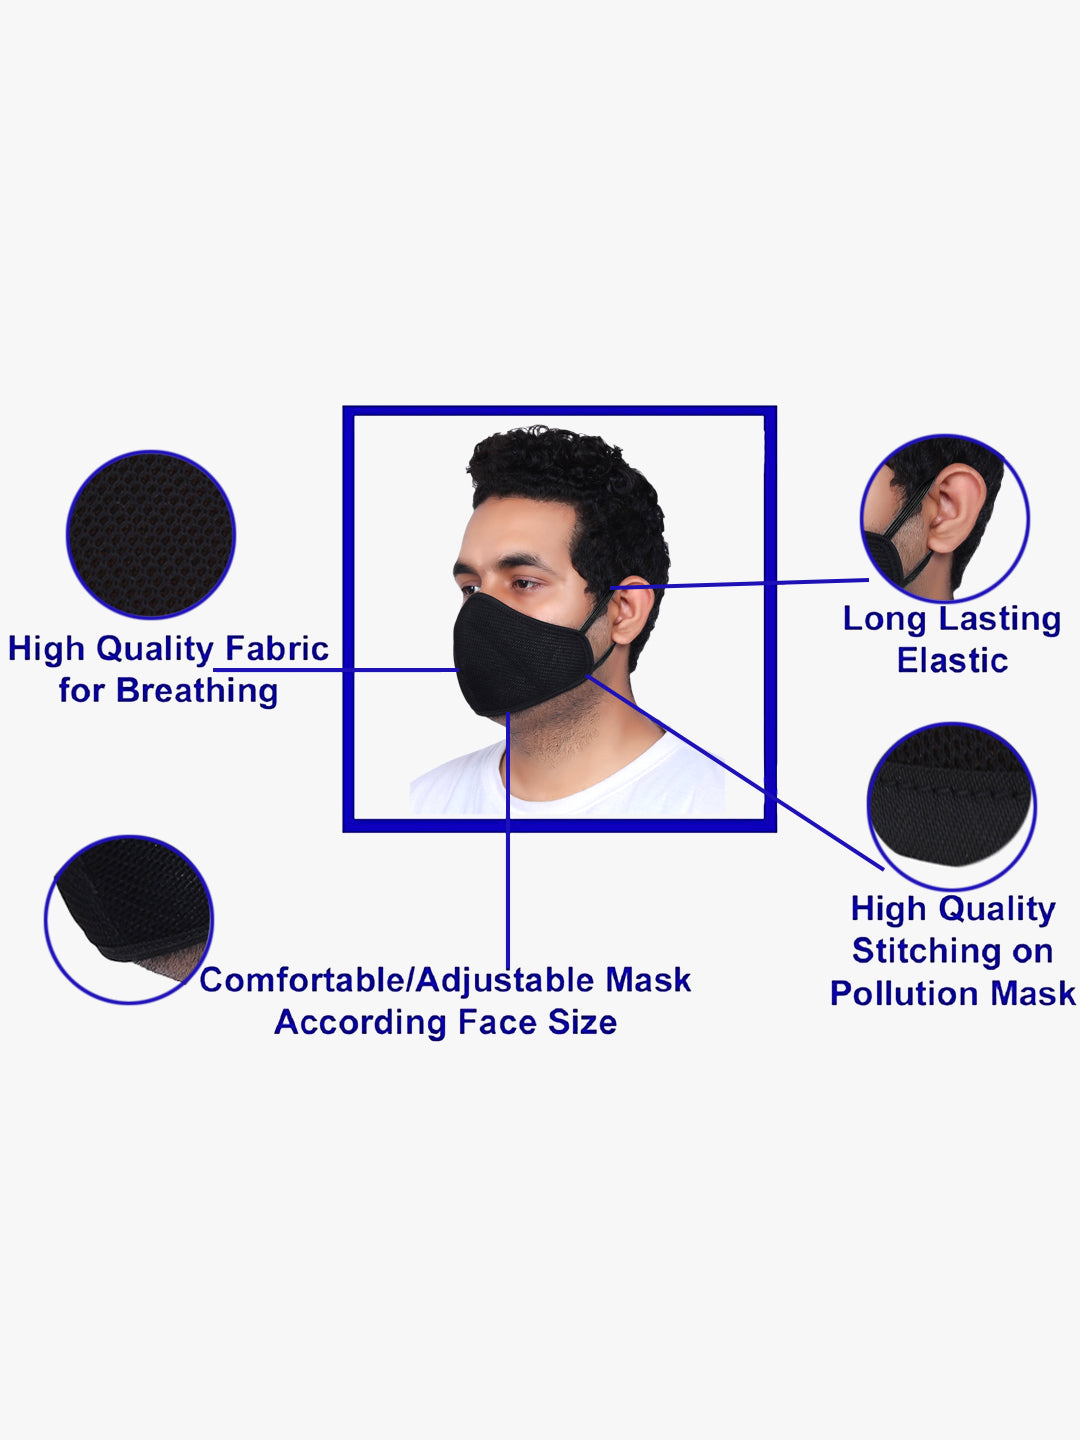 Yelloe elastomeric 2-Layer Face Armour Mask (Pack of 3)